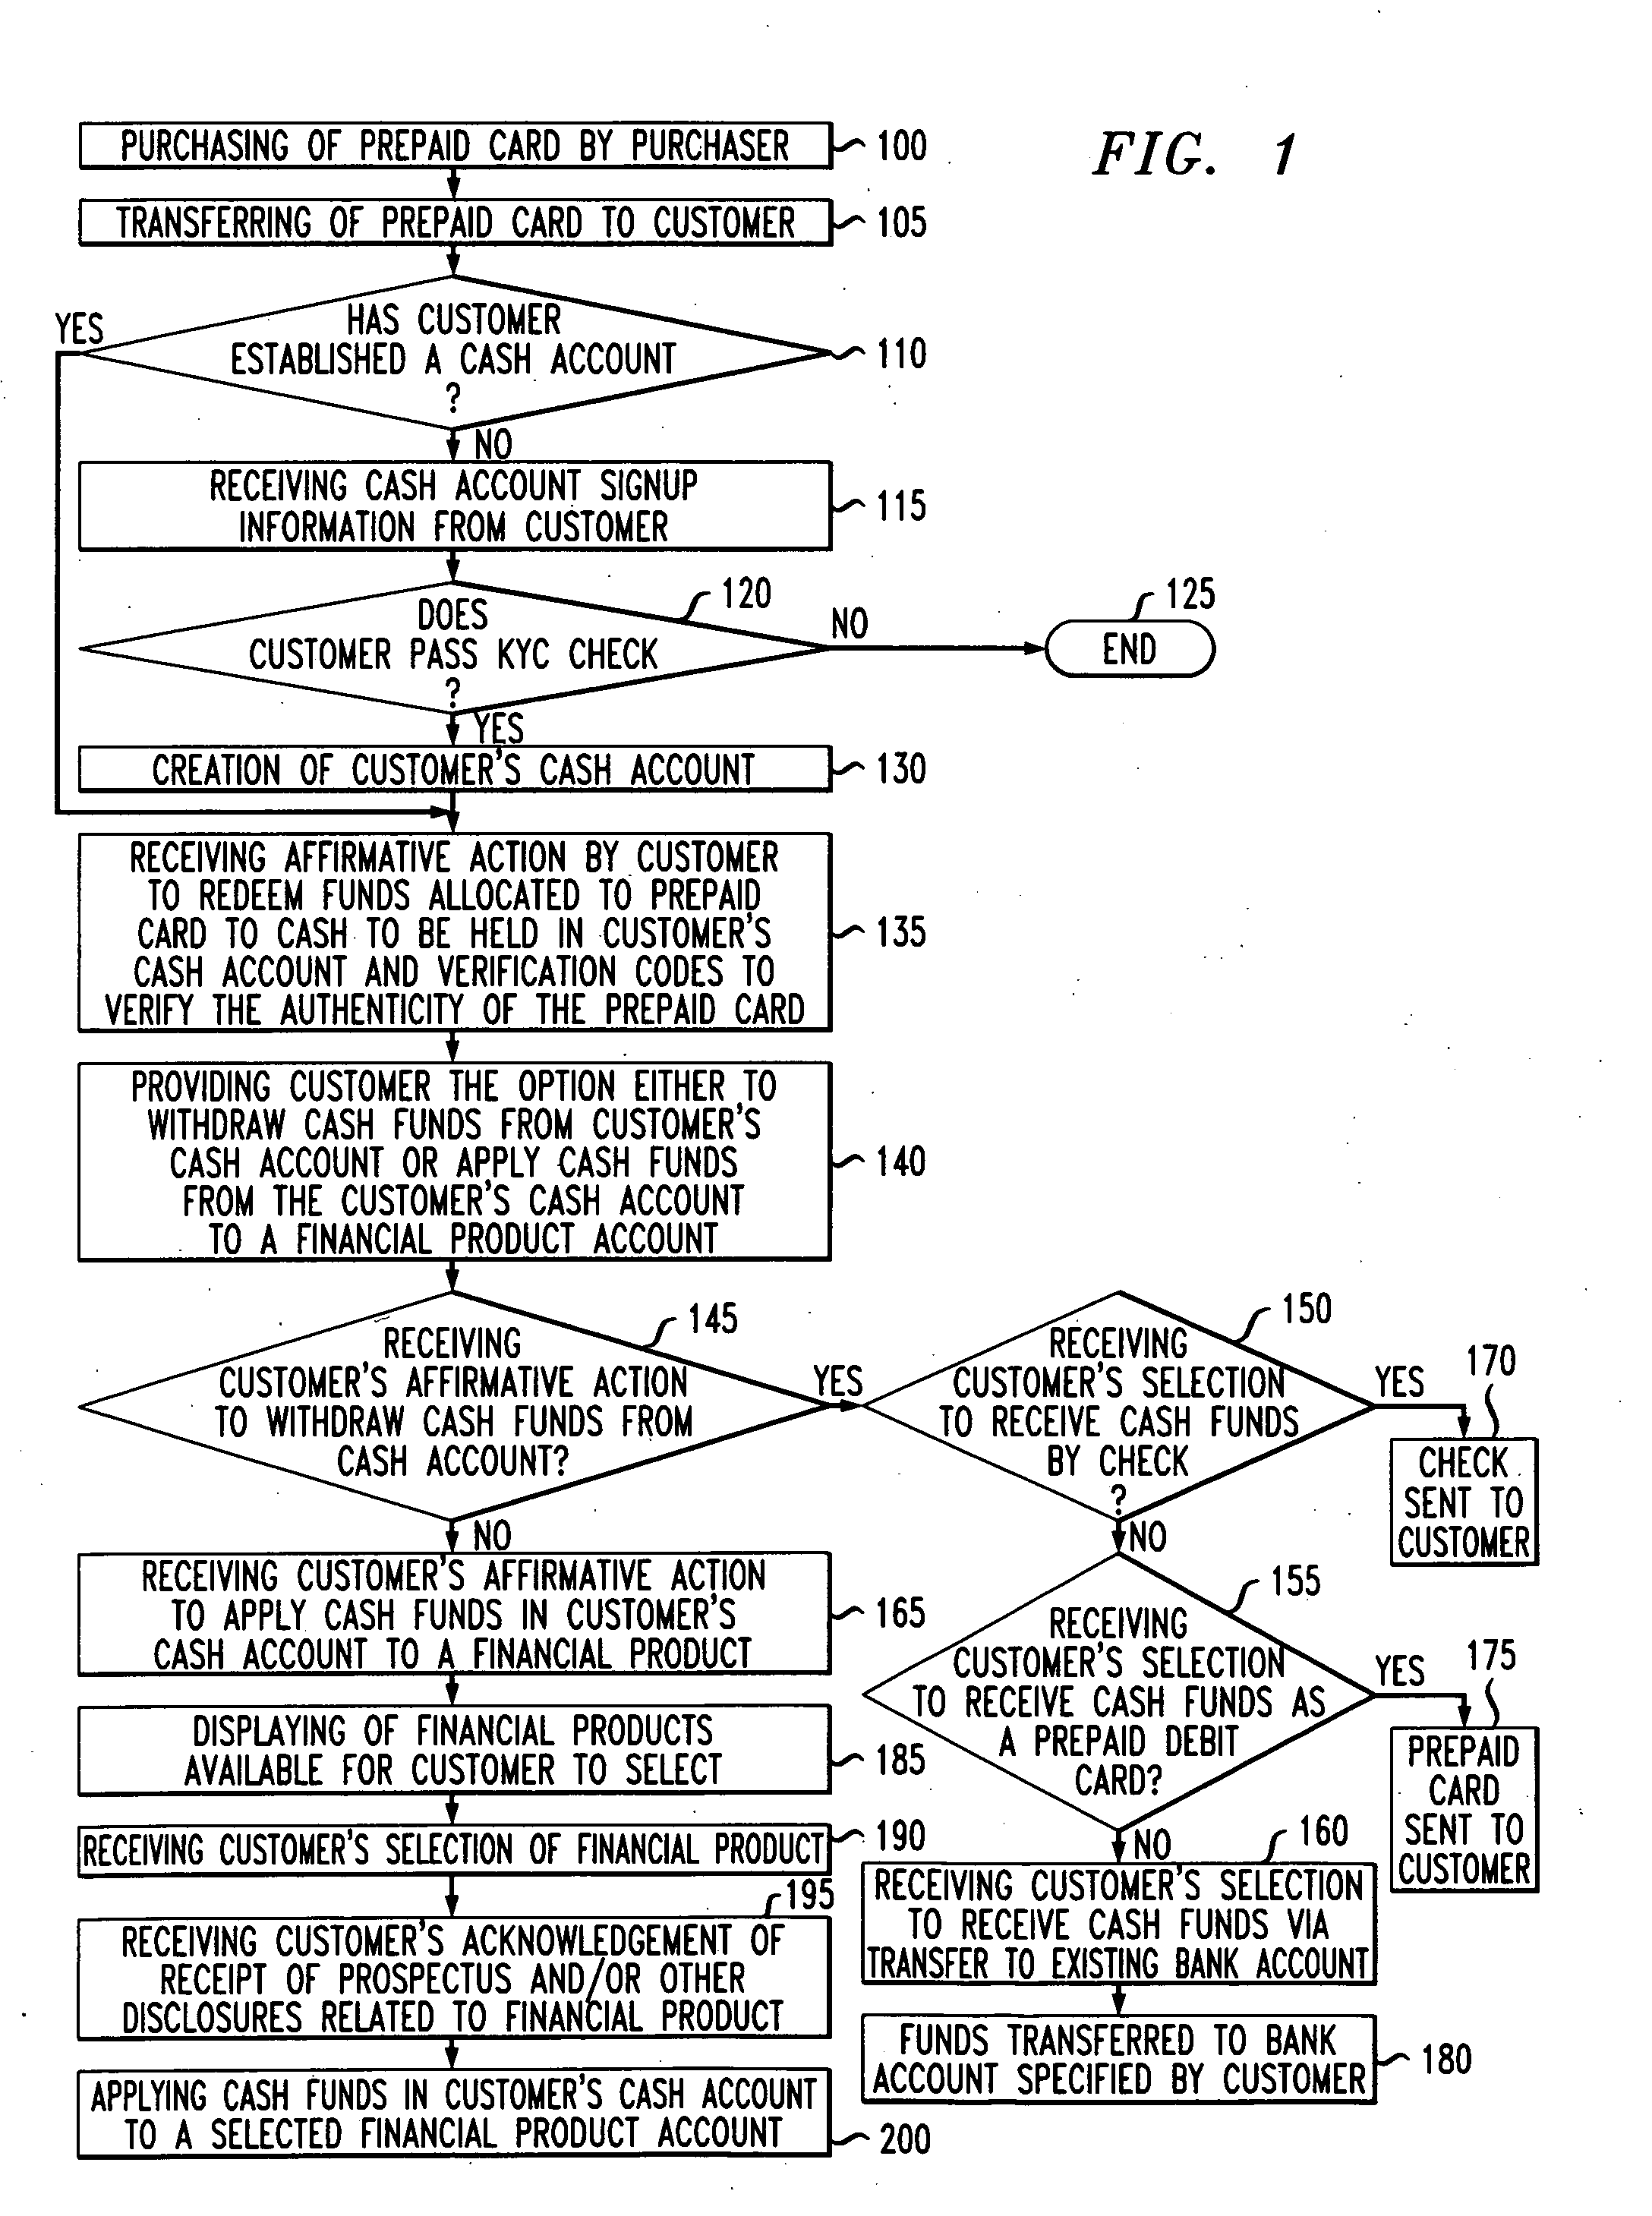 System and method for funding via a prepaid card a financial product intended or targeted by the purchaser at the time of purchase